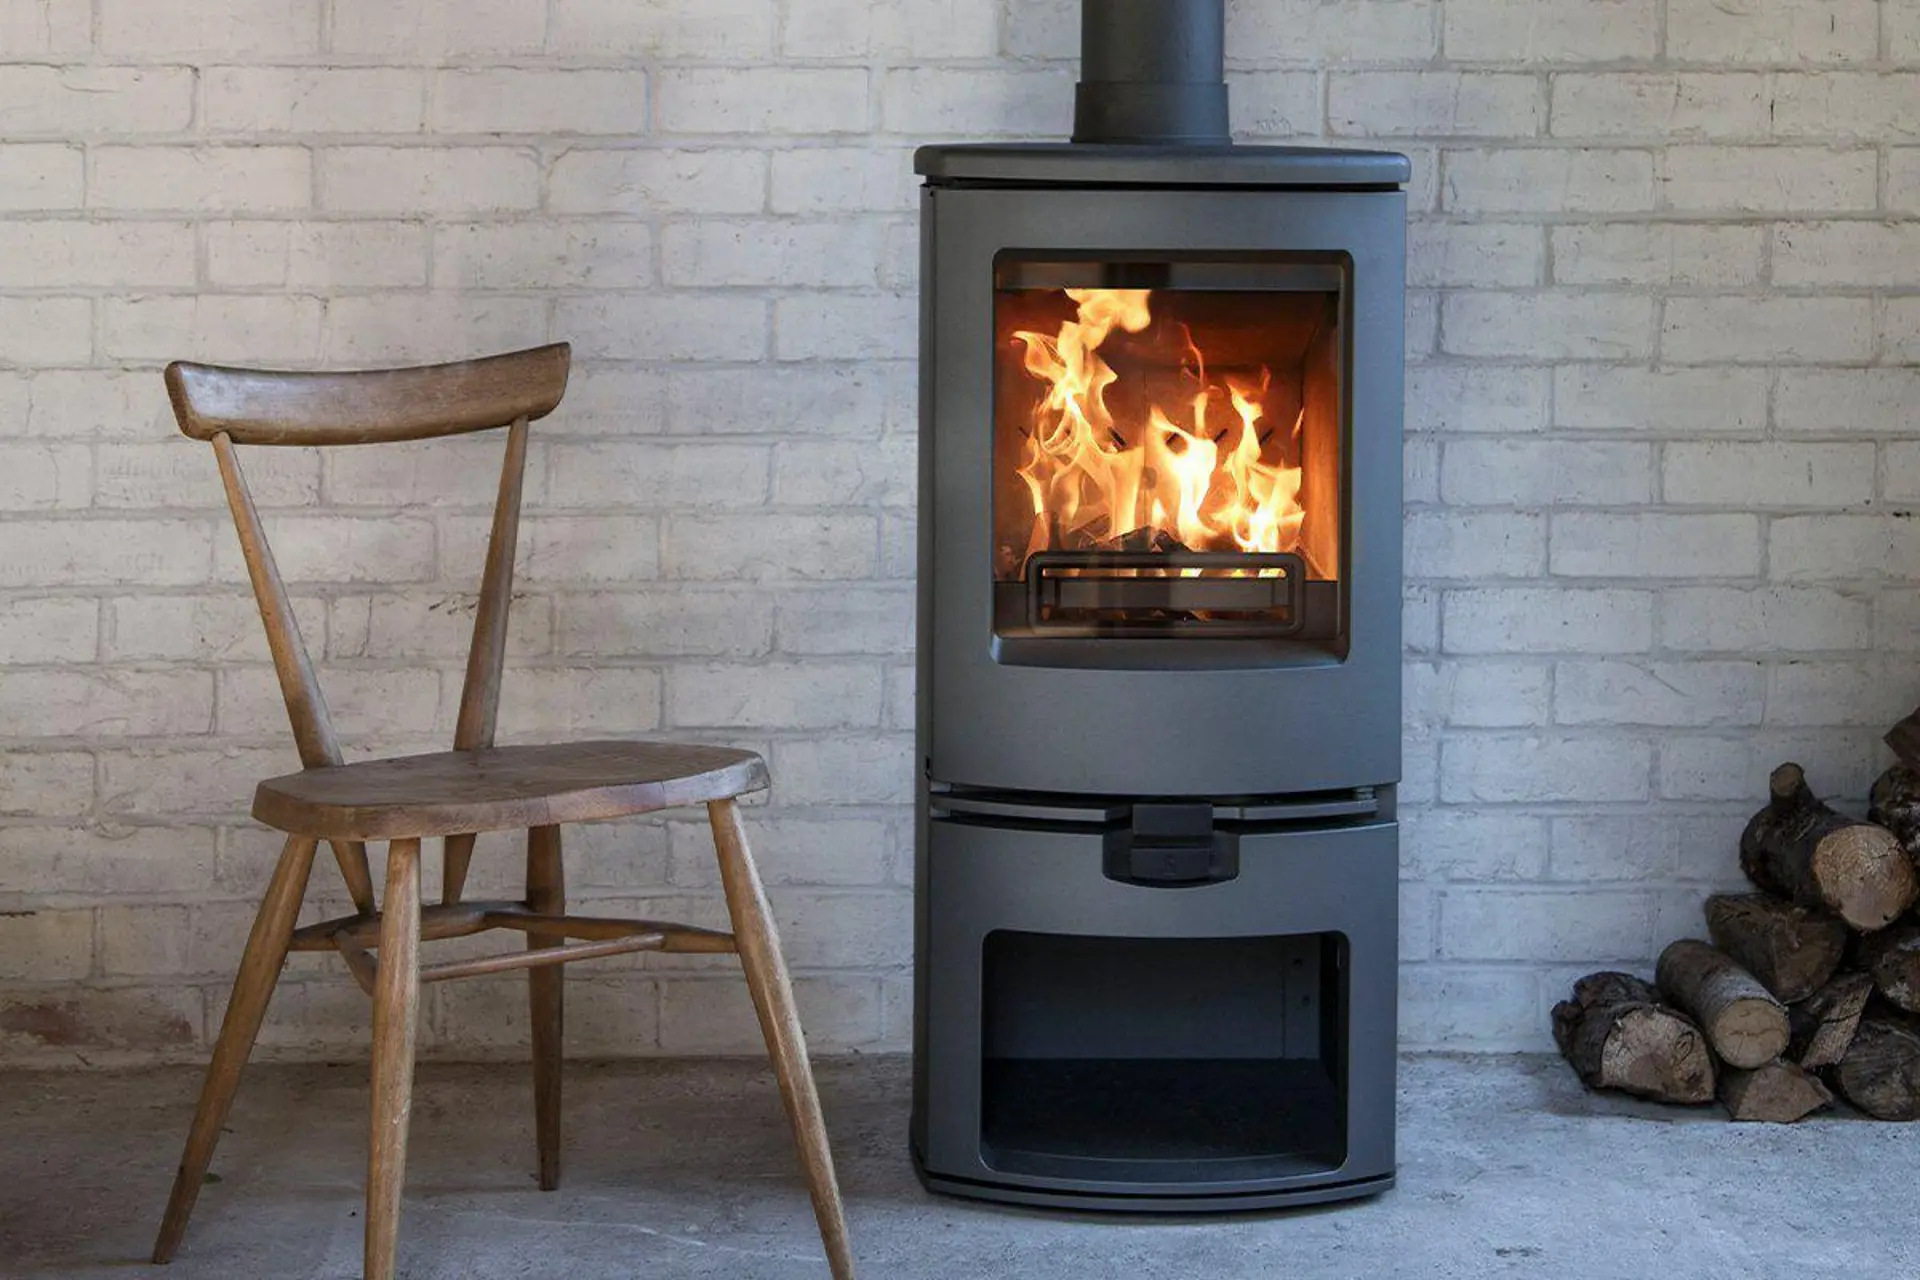 Charnwood-ARC-5-Multi-Fuel-Wood-Burning-Stove-Charnwood-Stoves-4_04a32a49-8ccb-4875-b618-efba082d2dad_5000x.png